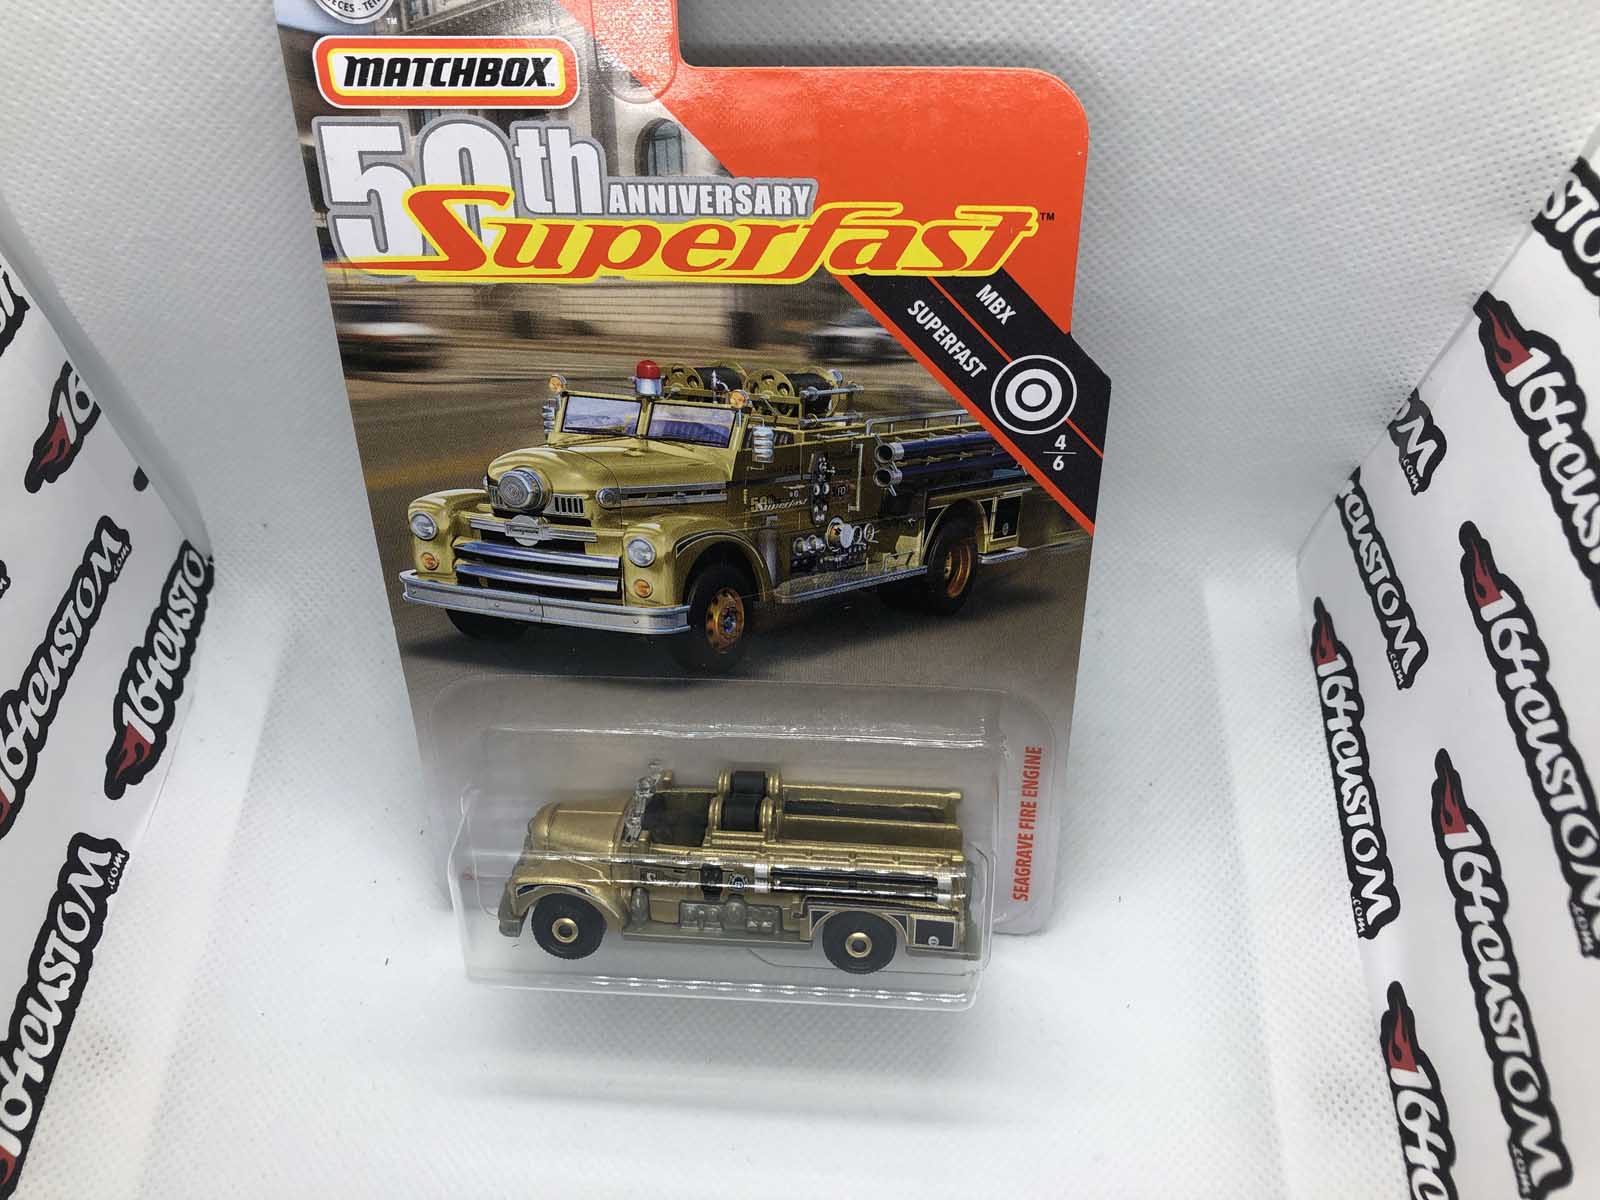 Seagrave Fire Engine Hot Wheels